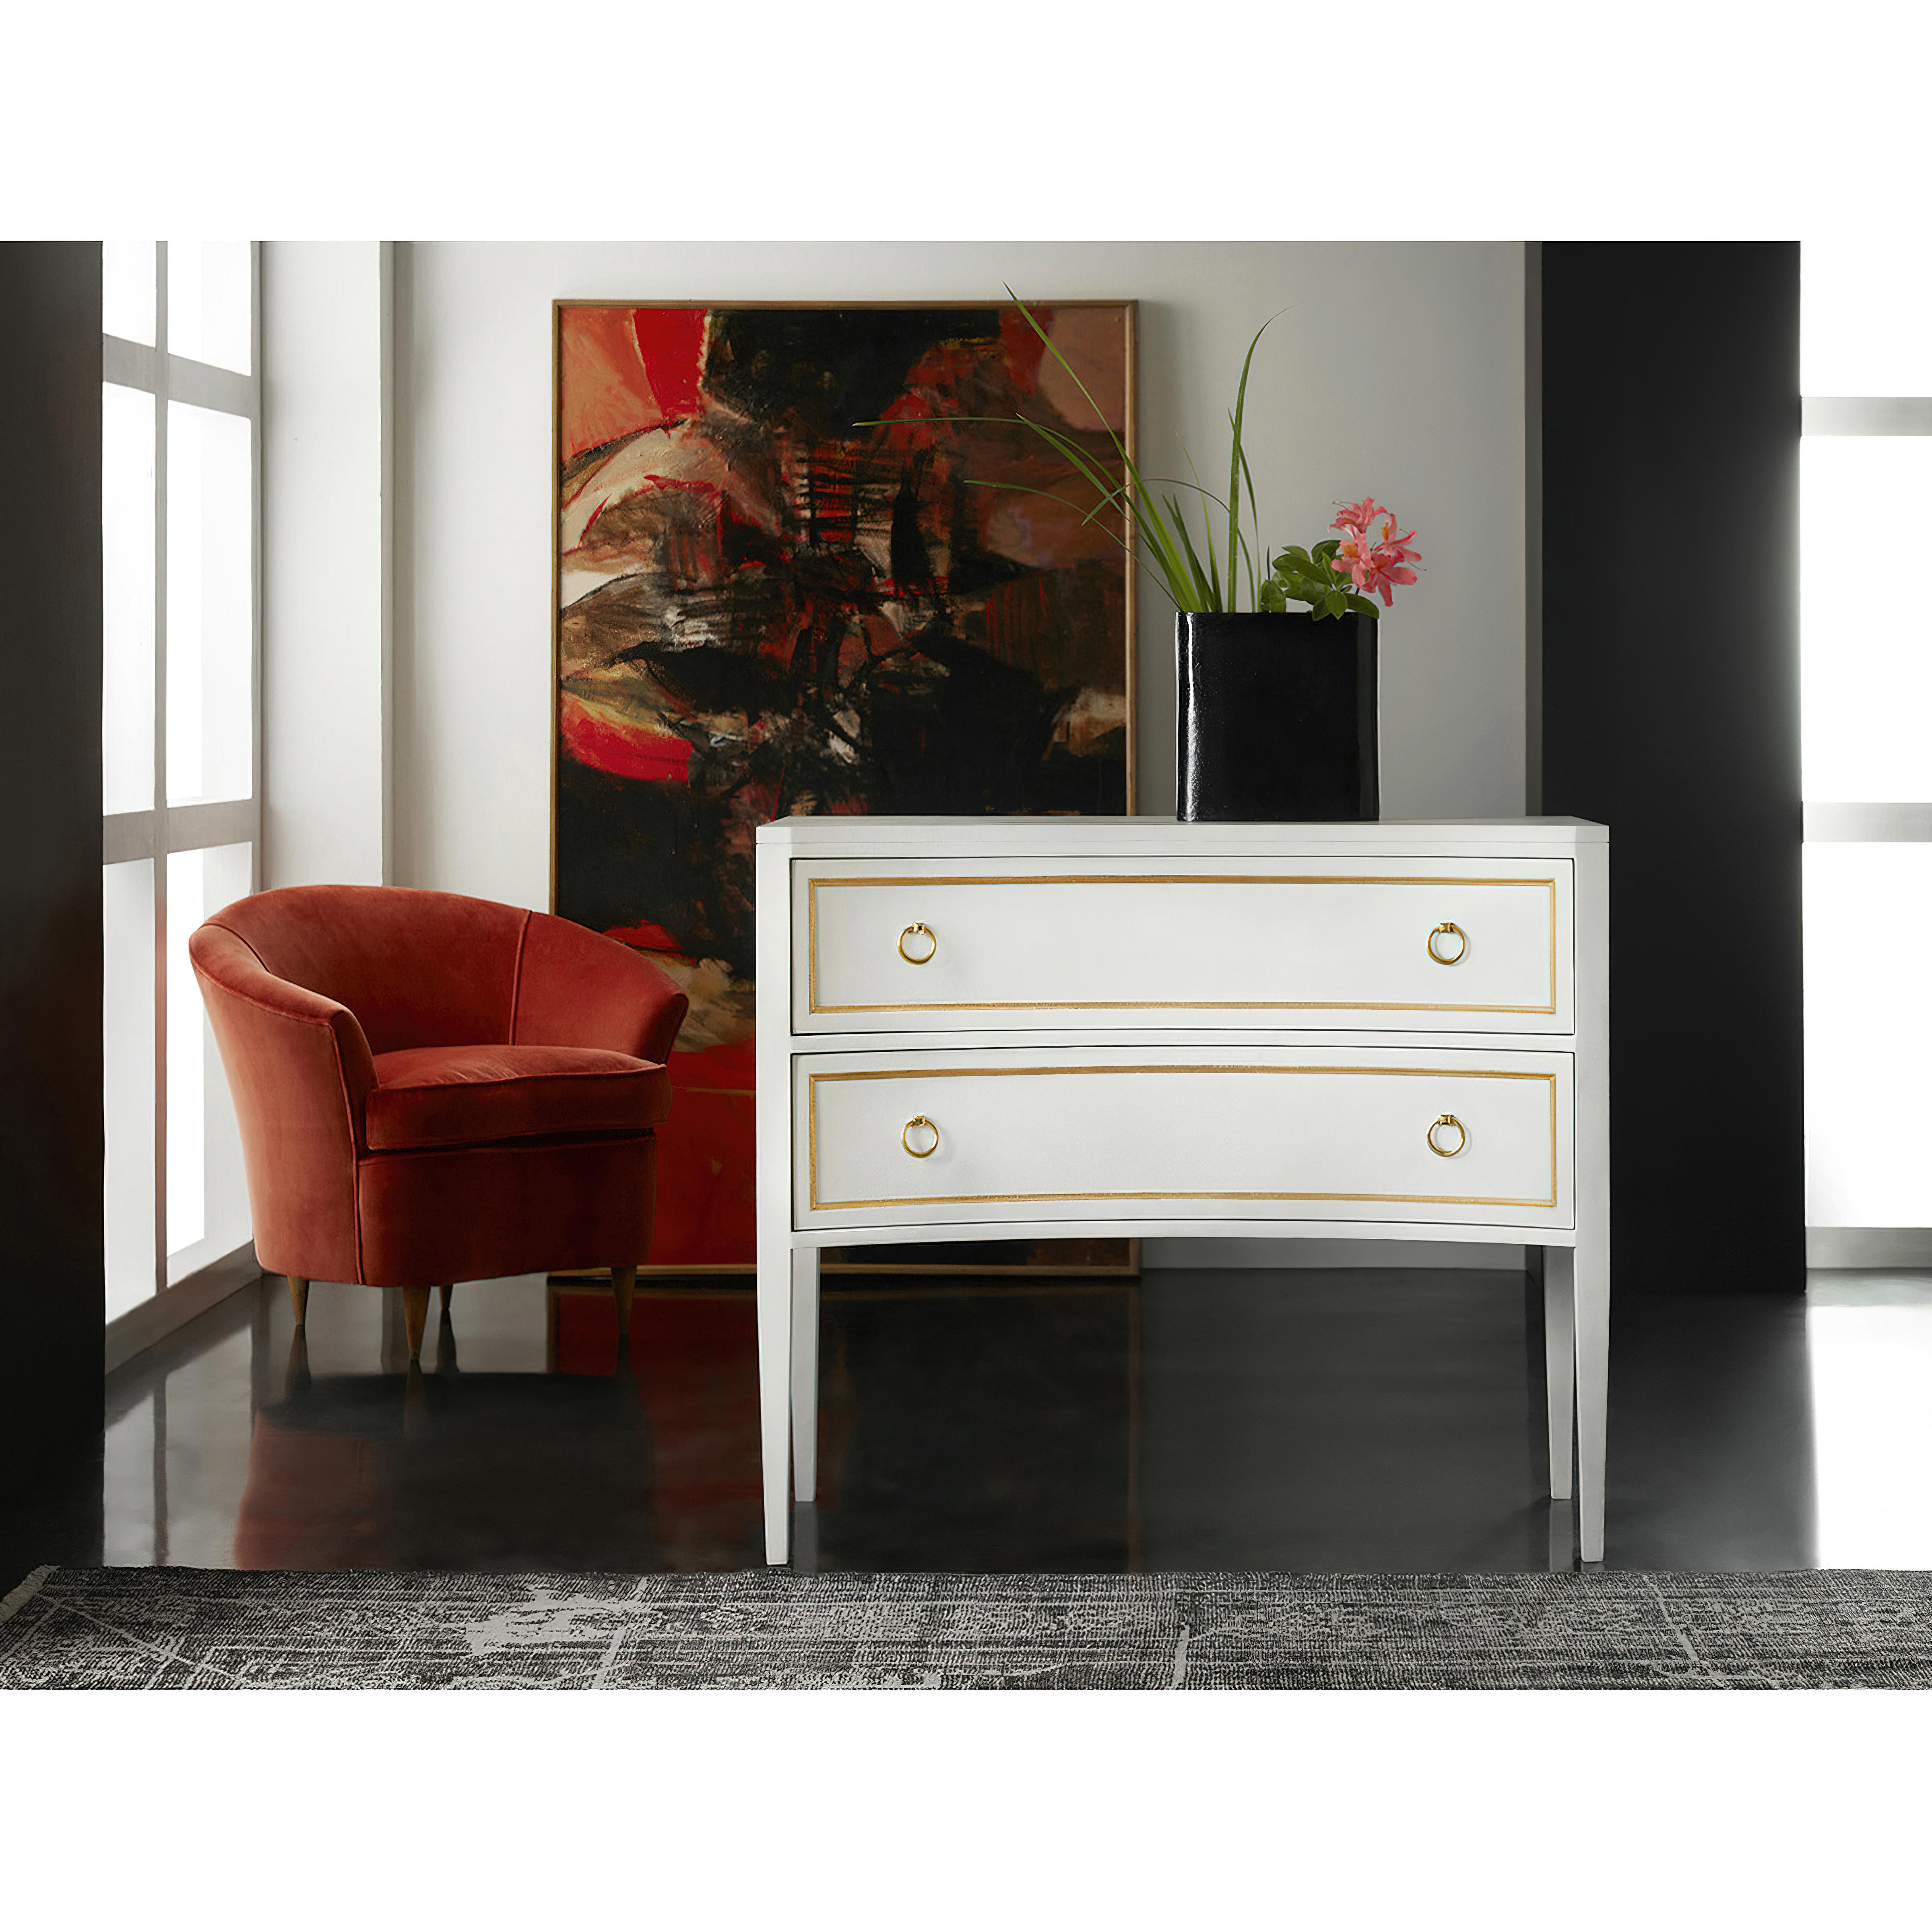 Gustavian White Painted commode, The Swedish Neo Classic style Gustavian commode with a concave front side, with paneled drawers and sides having gold leaf trim details. The two long drawers with brass ring pull hardware, raised on tapered legs and